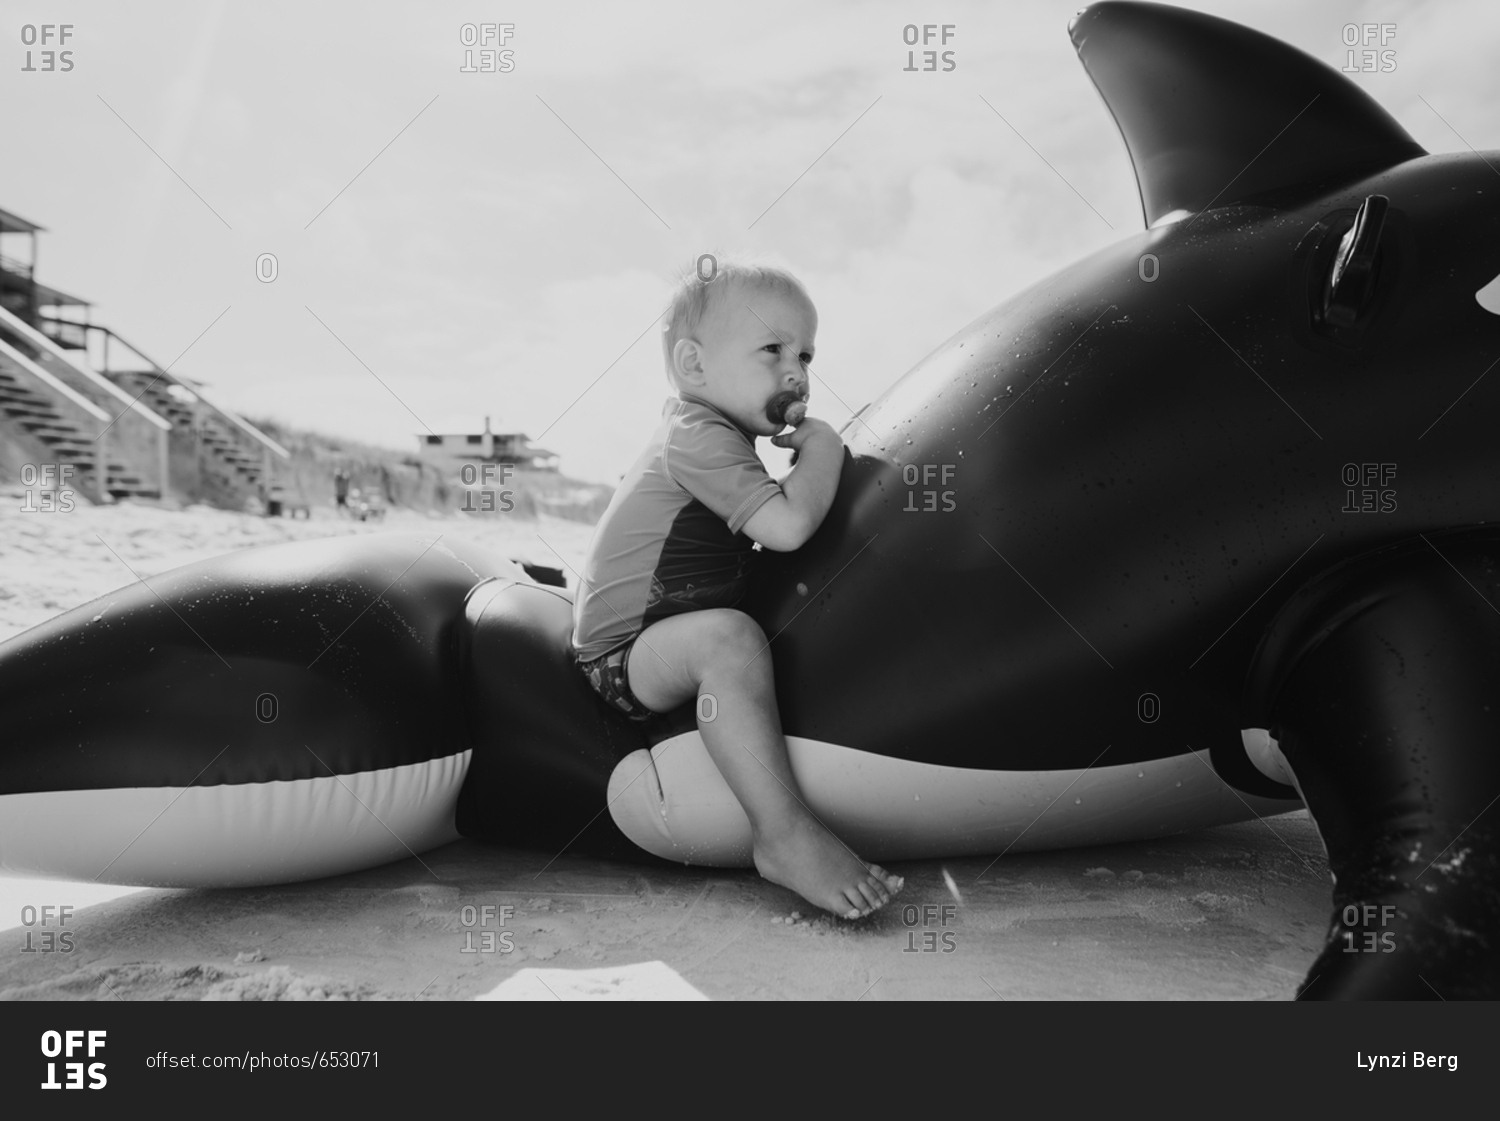 Baby boy sitting in an inflatable whale on a beach in black and white